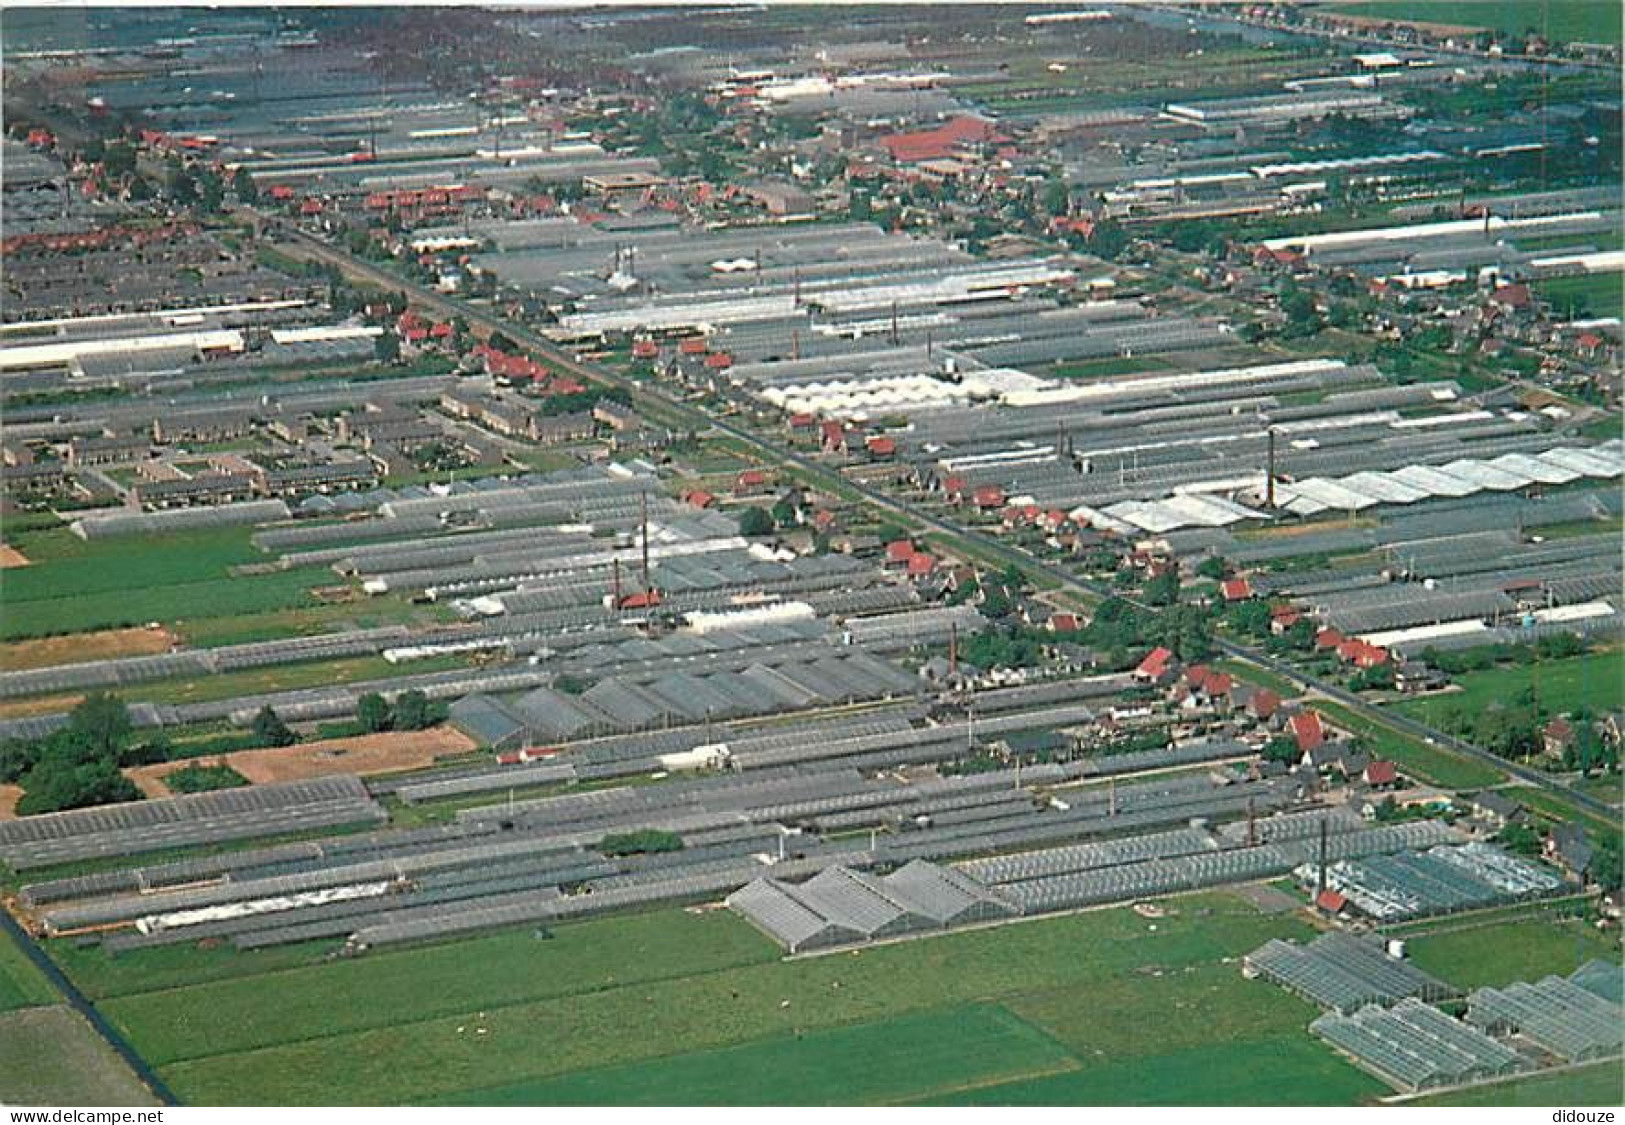 Pays-Bas - Nederland - Aalsmeer - With The Targest Flower Auction In The World, In The Heart Of Approximately 1250 Acres - Aalsmeer